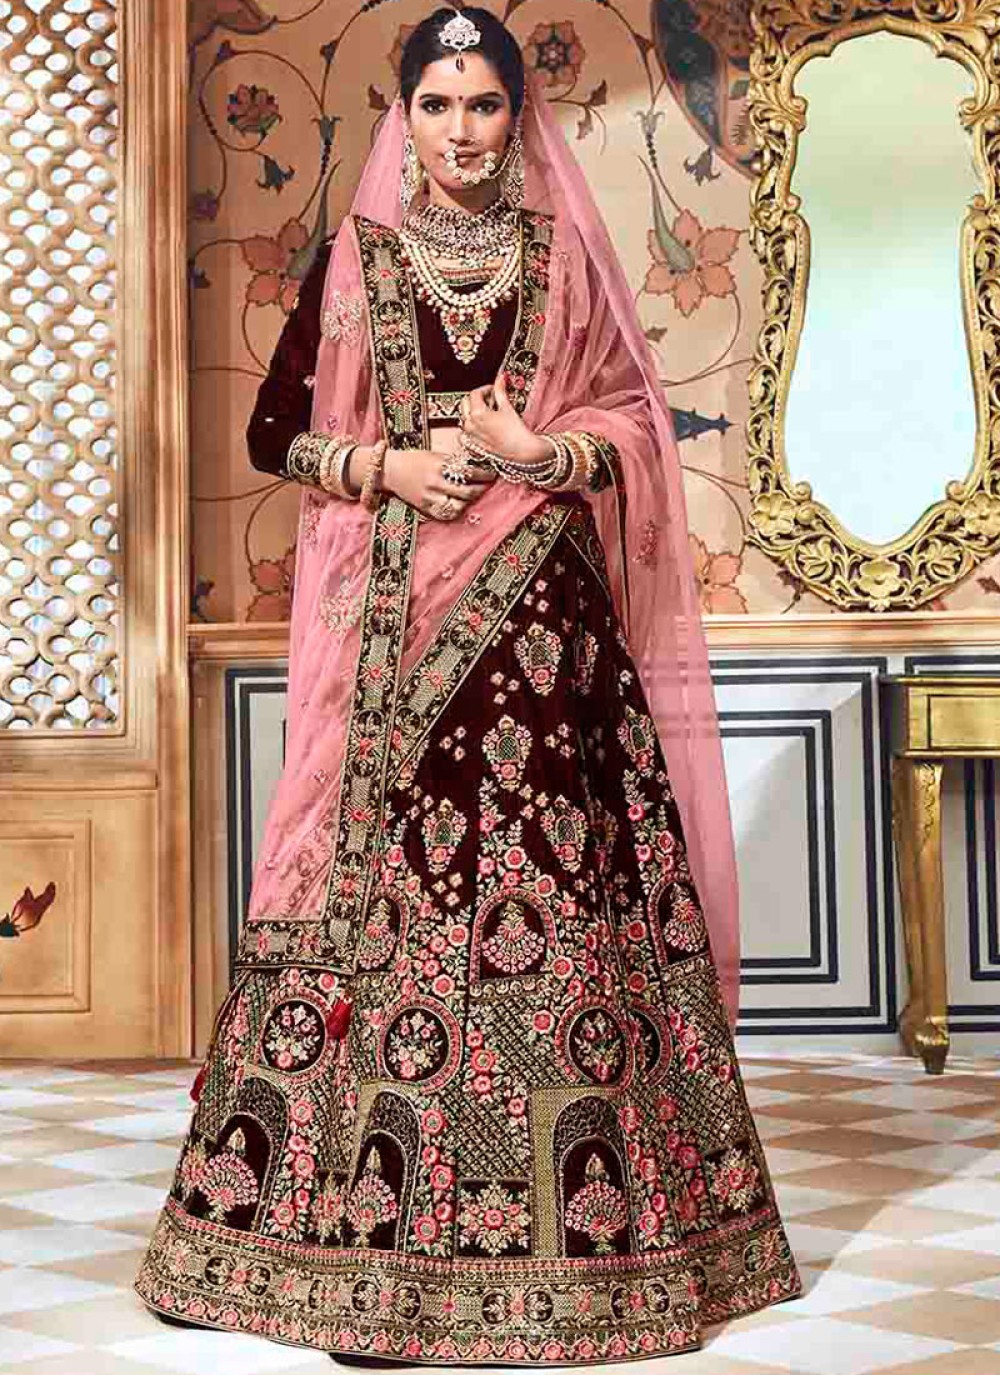 Photo of A bride in maroon lehenga and double dupatta twirling | Latest bridal  lehenga designs, Indian bridal outfits, Indian bridal dress